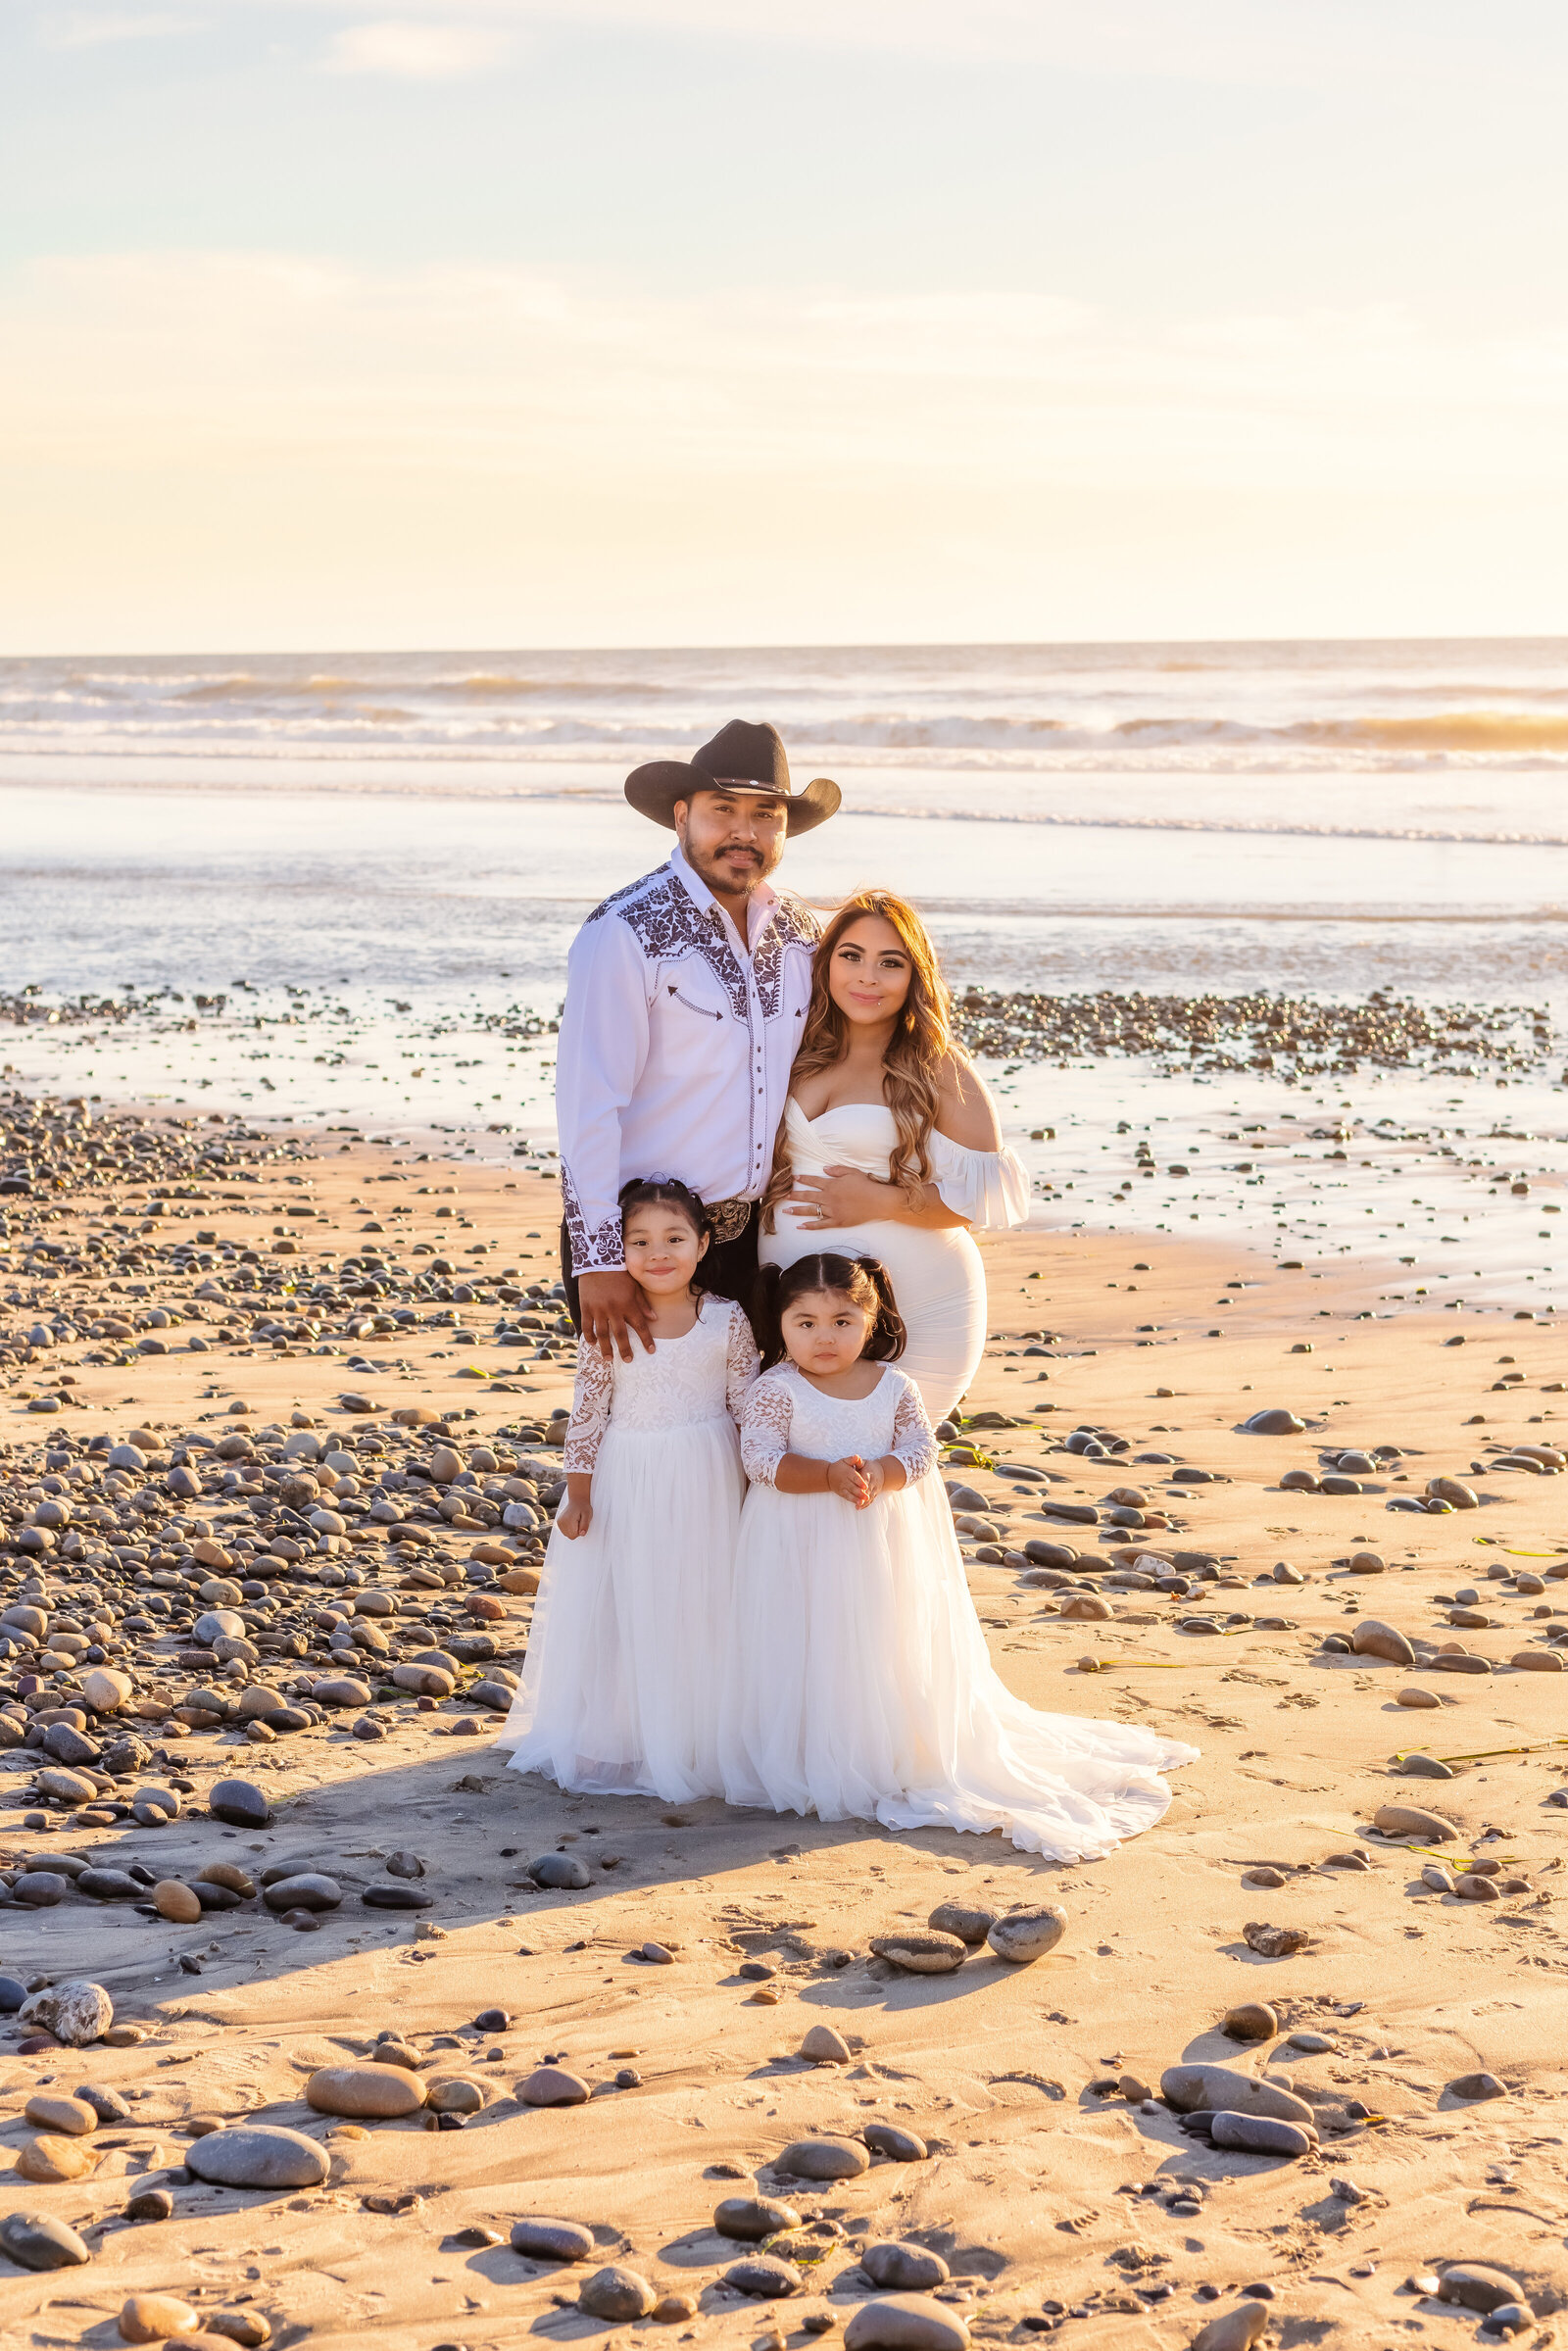 Maternity Photographer, a young family stands together at the beach, dad wears a cowboy hat and mom is expecting another child